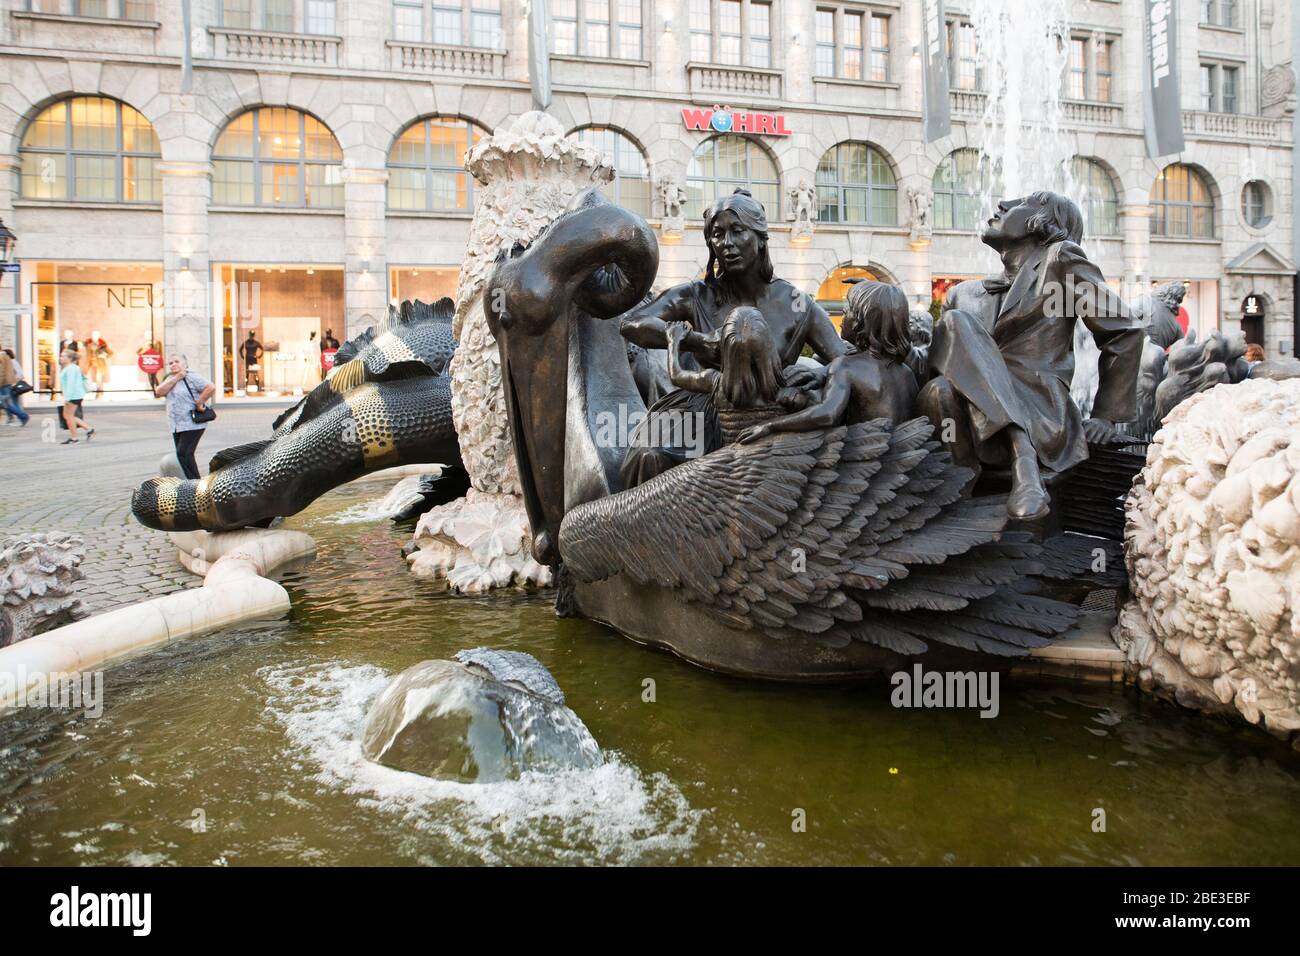 The Hans Sachs-Brunnen Ehekarussell fountain with its controversial sculptures about married life, on the Ludwigsplatz in Nuremberg, Germany. Stock Photo